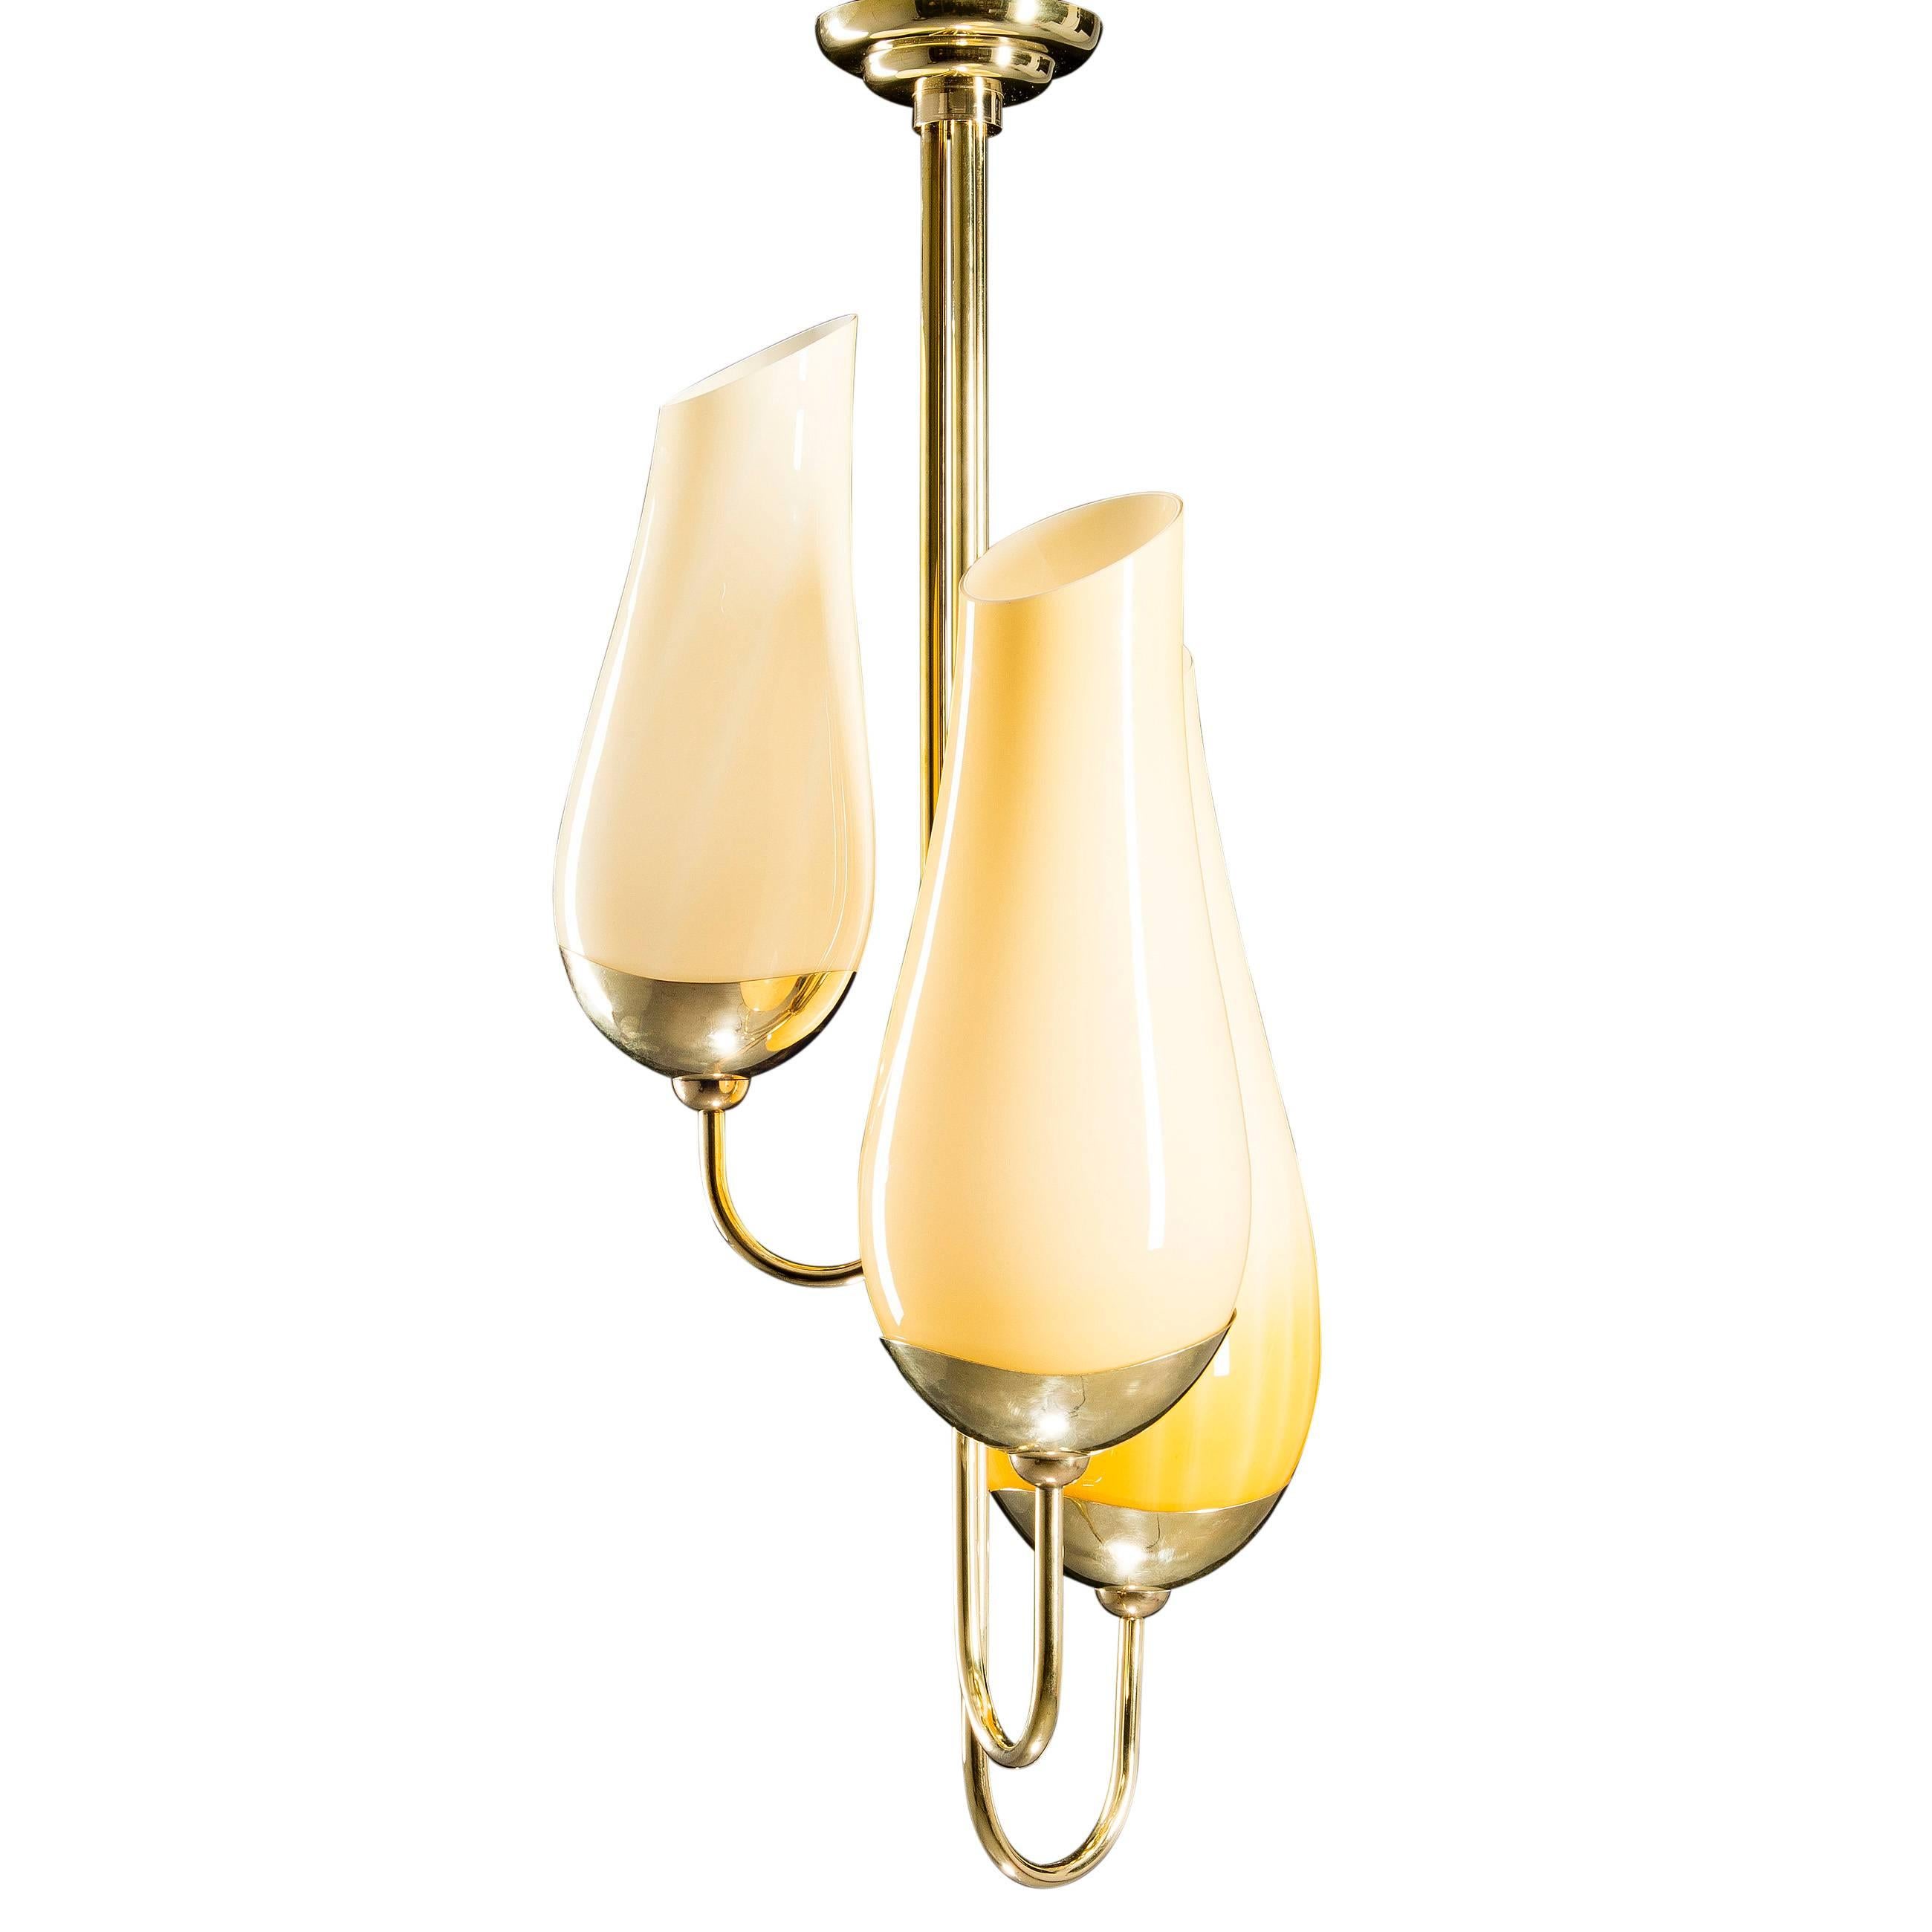 Scandinavian Modern Paavo Tynell Large Pendant in Brass and Glass for Idman, 1950s